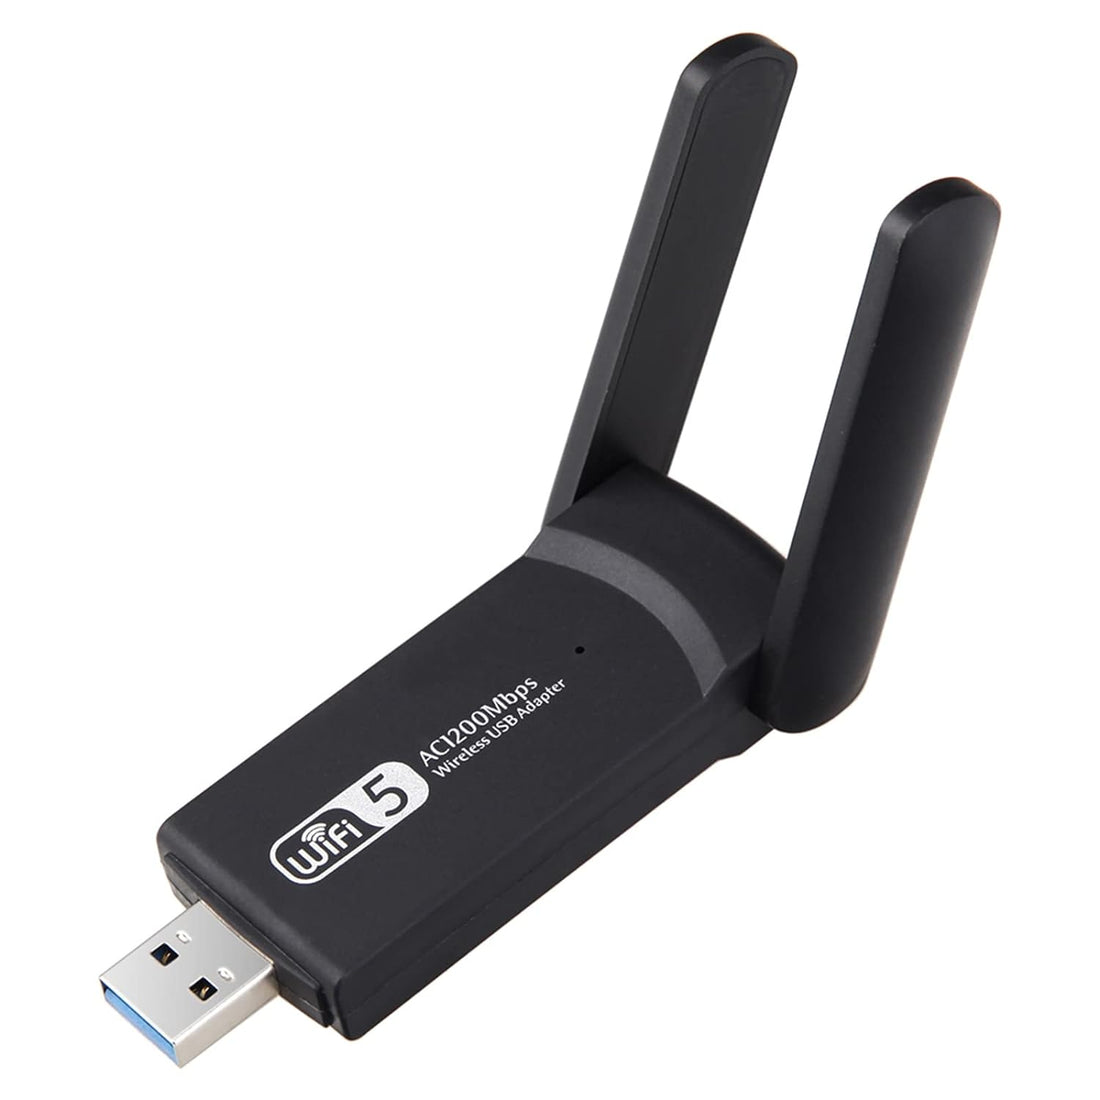 1200Mbps Wireless USB Wifi Adapter, with double External Antenna, Dual Band 2.4GHz/5GHz